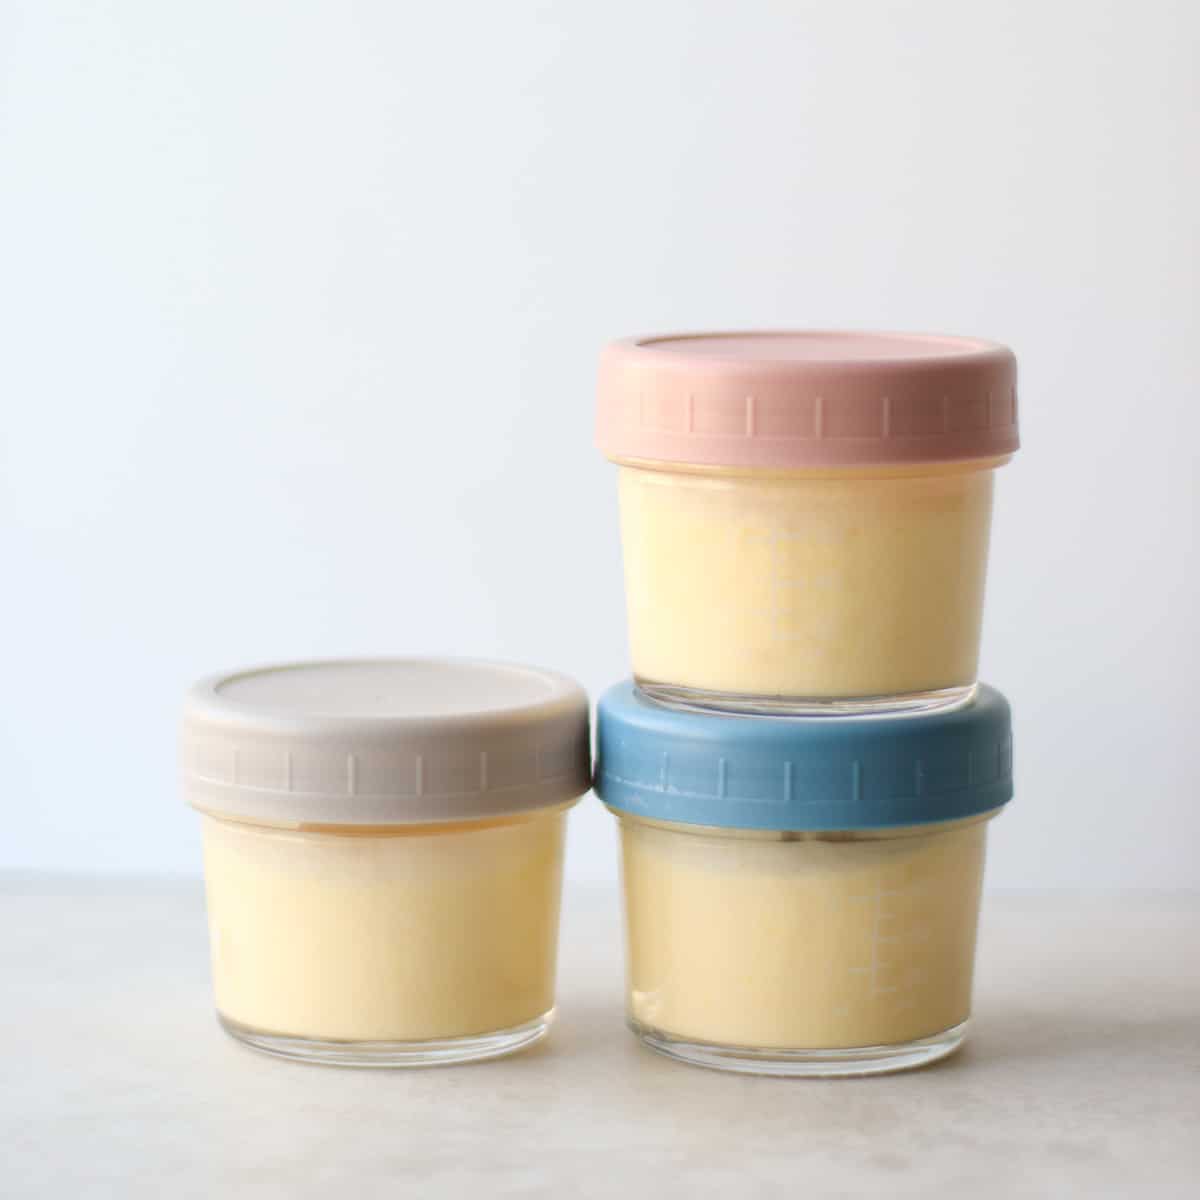 Three small glass containers with yogurt.